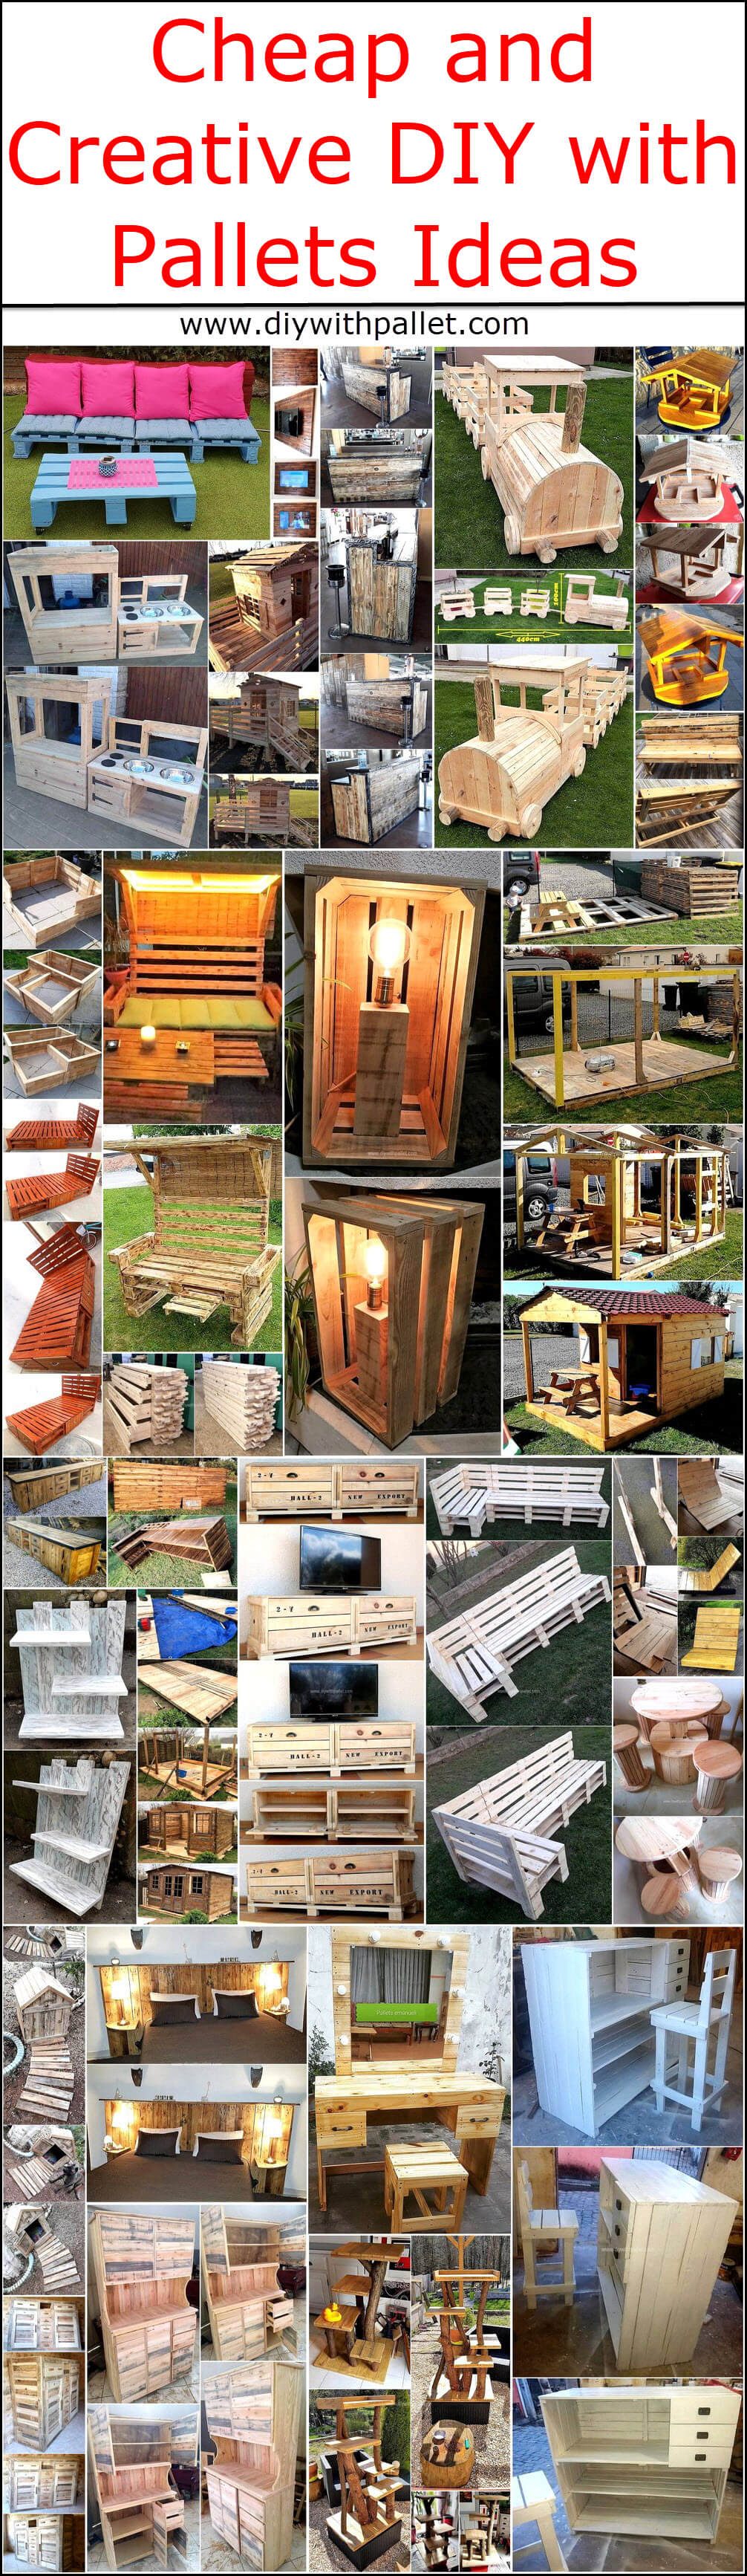 Cheap and Creative DIY with Pallets Ideas